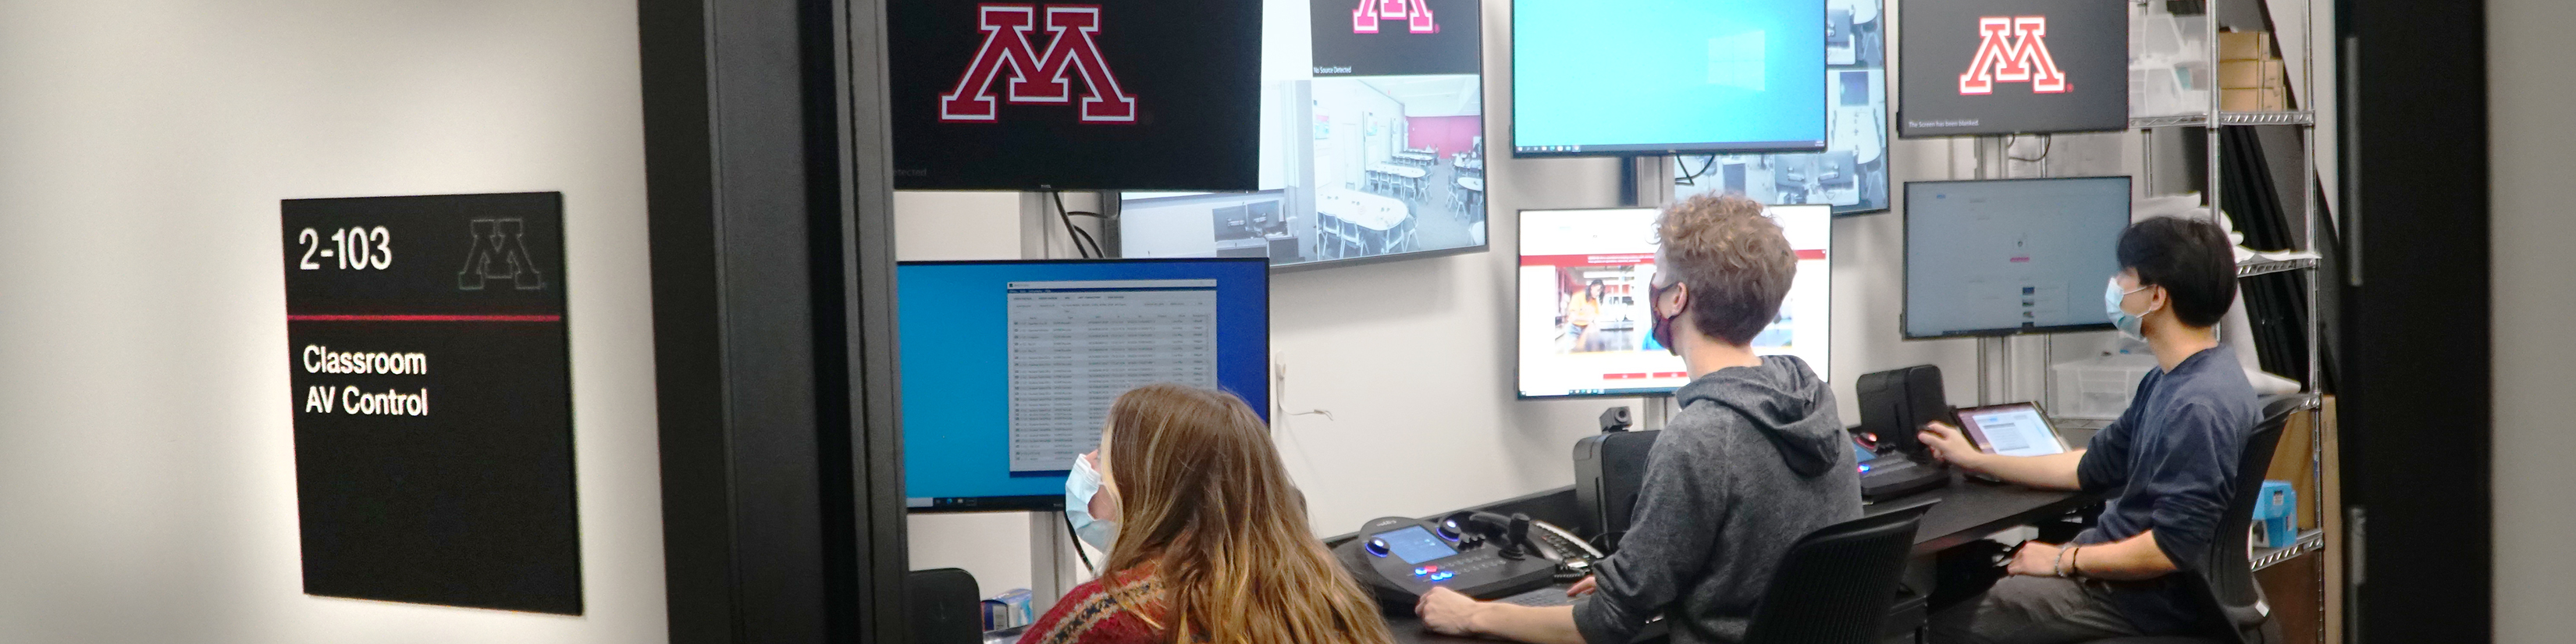 3 student staff managing classrooms at stations in a control booth